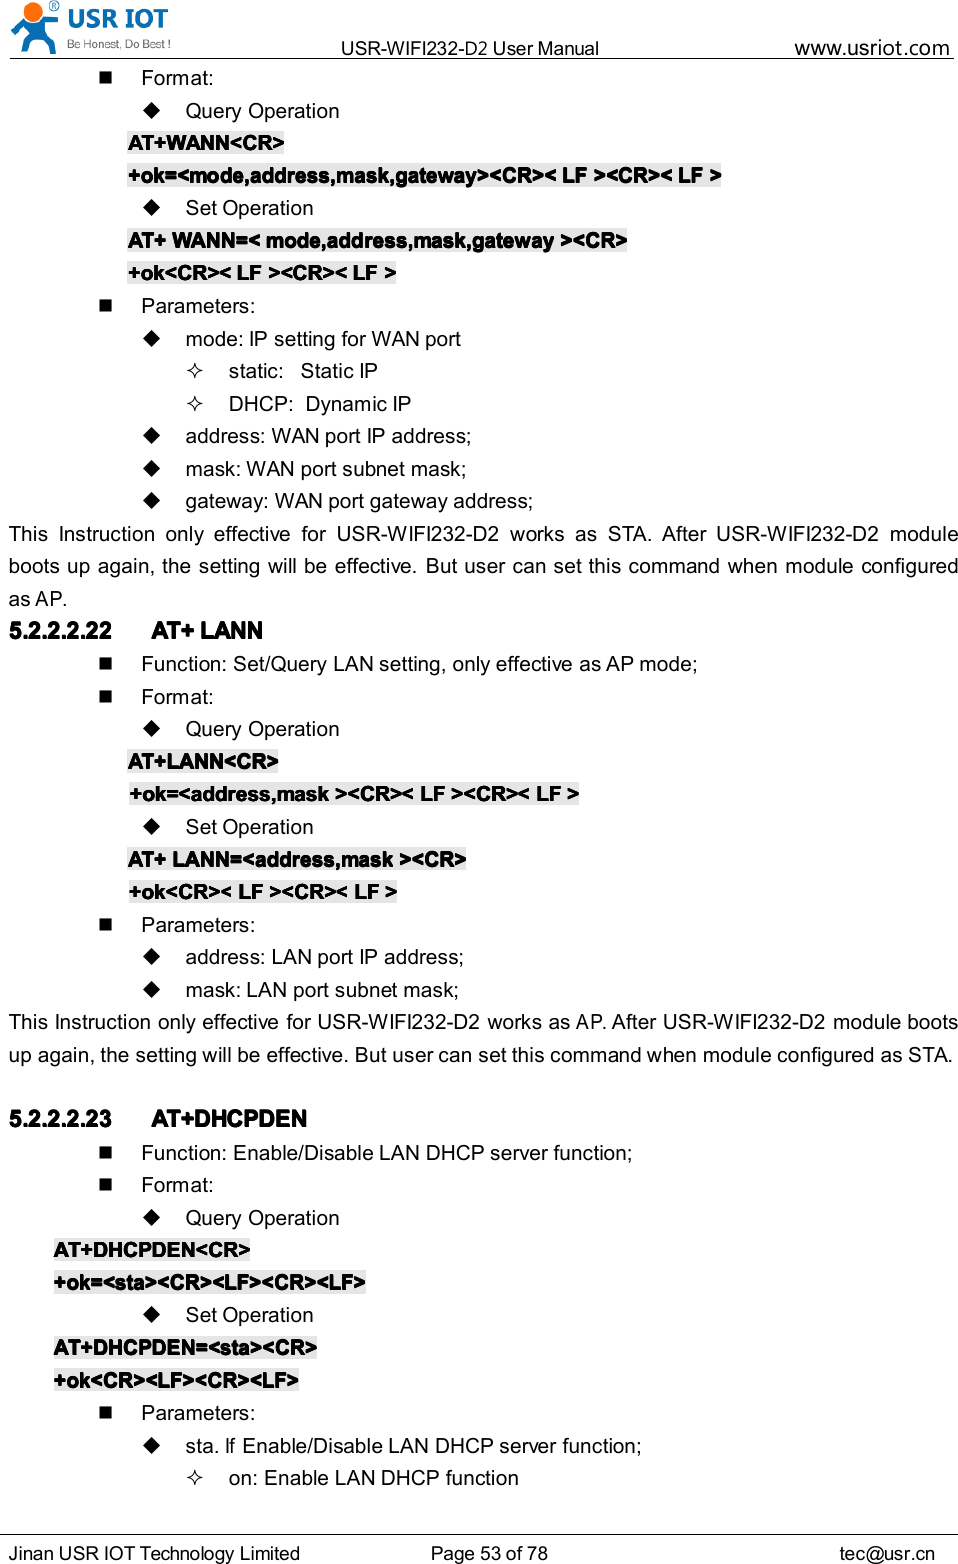 USR-WIFI232- D2 User Manual www.usr iot .comJinan USR IOT Technology Limited Page 53 of 78 tec@usr.cnFormat:Query OperationAT+WANN&lt;CR&gt;AT+WANN&lt;CR&gt;AT+WANN&lt;CR&gt;AT+WANN&lt;CR&gt;+ok=&lt;mode,address,mask,gateway&gt;&lt;CR&gt;&lt;+ok=&lt;mode,address,mask,gateway&gt;&lt;CR&gt;&lt;+ok=&lt;mode,address,mask,gateway&gt;&lt;CR&gt;&lt;+ok=&lt;mode,address,mask,gateway&gt;&lt;CR&gt;&lt; LFLFLFLF &gt;&lt;CR&gt;&lt;&gt;&lt;CR&gt;&lt;&gt;&lt;CR&gt;&lt;&gt;&lt;CR&gt;&lt; LFLFLFLF &gt;&gt;&gt;&gt;Set OperationAT+AT+AT+AT+ WANN=&lt;WANN=&lt;WANN=&lt;WANN=&lt; mode,address,mask,gatewaymode,address,mask,gatewaymode,address,mask,gatewaymode,address,mask,gateway &gt;&lt;CR&gt;&gt;&lt;CR&gt;&gt;&lt;CR&gt;&gt;&lt;CR&gt;+ok&lt;CR&gt;&lt;+ok&lt;CR&gt;&lt;+ok&lt;CR&gt;&lt;+ok&lt;CR&gt;&lt; LFLFLFLF &gt;&lt;CR&gt;&lt;&gt;&lt;CR&gt;&lt;&gt;&lt;CR&gt;&lt;&gt;&lt;CR&gt;&lt; LFLFLFLF &gt;&gt;&gt;&gt;Parameters:mode: IP setting for WAN portstatic: Static IPDHCP: Dynamic IPaddress: WAN port IP address;mask: WAN port subnet mask;gateway: WAN port gateway address;This Instruction only effective for USR-WIFI232-D2 works as STA. After USR-WIFI232-D2 moduleboots up again, the setting will be effective. But user can set this command when module configuredasAP.5.2.2.2.225.2.2.2.225.2.2.2.225.2.2.2.22 AT+AT+AT+AT+ LANNLANNLANNLANNFunction: Set/Query LAN setting, only effective as AP mode;Format:Query OperationAT+LANN&lt;CR&gt;AT+LANN&lt;CR&gt;AT+LANN&lt;CR&gt;AT+LANN&lt;CR&gt;+ok=&lt;address,mask+ok=&lt;address,mask+ok=&lt;address,mask+ok=&lt;address,mask &gt;&lt;CR&gt;&lt;&gt;&lt;CR&gt;&lt;&gt;&lt;CR&gt;&lt;&gt;&lt;CR&gt;&lt; LFLFLFLF &gt;&lt;CR&gt;&lt;&gt;&lt;CR&gt;&lt;&gt;&lt;CR&gt;&lt;&gt;&lt;CR&gt;&lt; LFLFLFLF &gt;&gt;&gt;&gt;Set OperationAT+AT+AT+AT+ LANN=&lt;address,maskLANN=&lt;address,maskLANN=&lt;address,maskLANN=&lt;address,mask &gt;&lt;CR&gt;&gt;&lt;CR&gt;&gt;&lt;CR&gt;&gt;&lt;CR&gt;+ok&lt;CR&gt;&lt;+ok&lt;CR&gt;&lt;+ok&lt;CR&gt;&lt;+ok&lt;CR&gt;&lt; LFLFLFLF &gt;&lt;CR&gt;&lt;&gt;&lt;CR&gt;&lt;&gt;&lt;CR&gt;&lt;&gt;&lt;CR&gt;&lt; LFLFLFLF &gt;&gt;&gt;&gt;Parameters:address: LAN port IP address;mask: LAN port subnet mask;This Instruction only effective for USR-WIFI232-D2 works asAP.After USR-WIFI232-D2 module bootsup again, the setting will be effective. But user can set this command when module configured as STA.5.2.2.2.235.2.2.2.235.2.2.2.235.2.2.2.23 AT+DHCPDENAT+DHCPDENAT+DHCPDENAT+DHCPDENFunction: Enable/Disable LAN DHCP server function;Format:Query OperationAT+DHCPDEN&lt;CR&gt;AT+DHCPDEN&lt;CR&gt;AT+DHCPDEN&lt;CR&gt;AT+DHCPDEN&lt;CR&gt;+ok=&lt;sta&gt;&lt;CR&gt;&lt;LF&gt;&lt;CR&gt;&lt;LF&gt;+ok=&lt;sta&gt;&lt;CR&gt;&lt;LF&gt;&lt;CR&gt;&lt;LF&gt;+ok=&lt;sta&gt;&lt;CR&gt;&lt;LF&gt;&lt;CR&gt;&lt;LF&gt;+ok=&lt;sta&gt;&lt;CR&gt;&lt;LF&gt;&lt;CR&gt;&lt;LF&gt;Set OperationAT+DHCPDEN=&lt;sta&gt;&lt;CR&gt;AT+DHCPDEN=&lt;sta&gt;&lt;CR&gt;AT+DHCPDEN=&lt;sta&gt;&lt;CR&gt;AT+DHCPDEN=&lt;sta&gt;&lt;CR&gt;+ok&lt;CR&gt;&lt;LF&gt;&lt;CR&gt;&lt;LF&gt;+ok&lt;CR&gt;&lt;LF&gt;&lt;CR&gt;&lt;LF&gt;+ok&lt;CR&gt;&lt;LF&gt;&lt;CR&gt;&lt;LF&gt;+ok&lt;CR&gt;&lt;LF&gt;&lt;CR&gt;&lt;LF&gt;Parameters:sta.IfEnable/Disable LAN DHCP server function;on: Enable LAN DHCP function